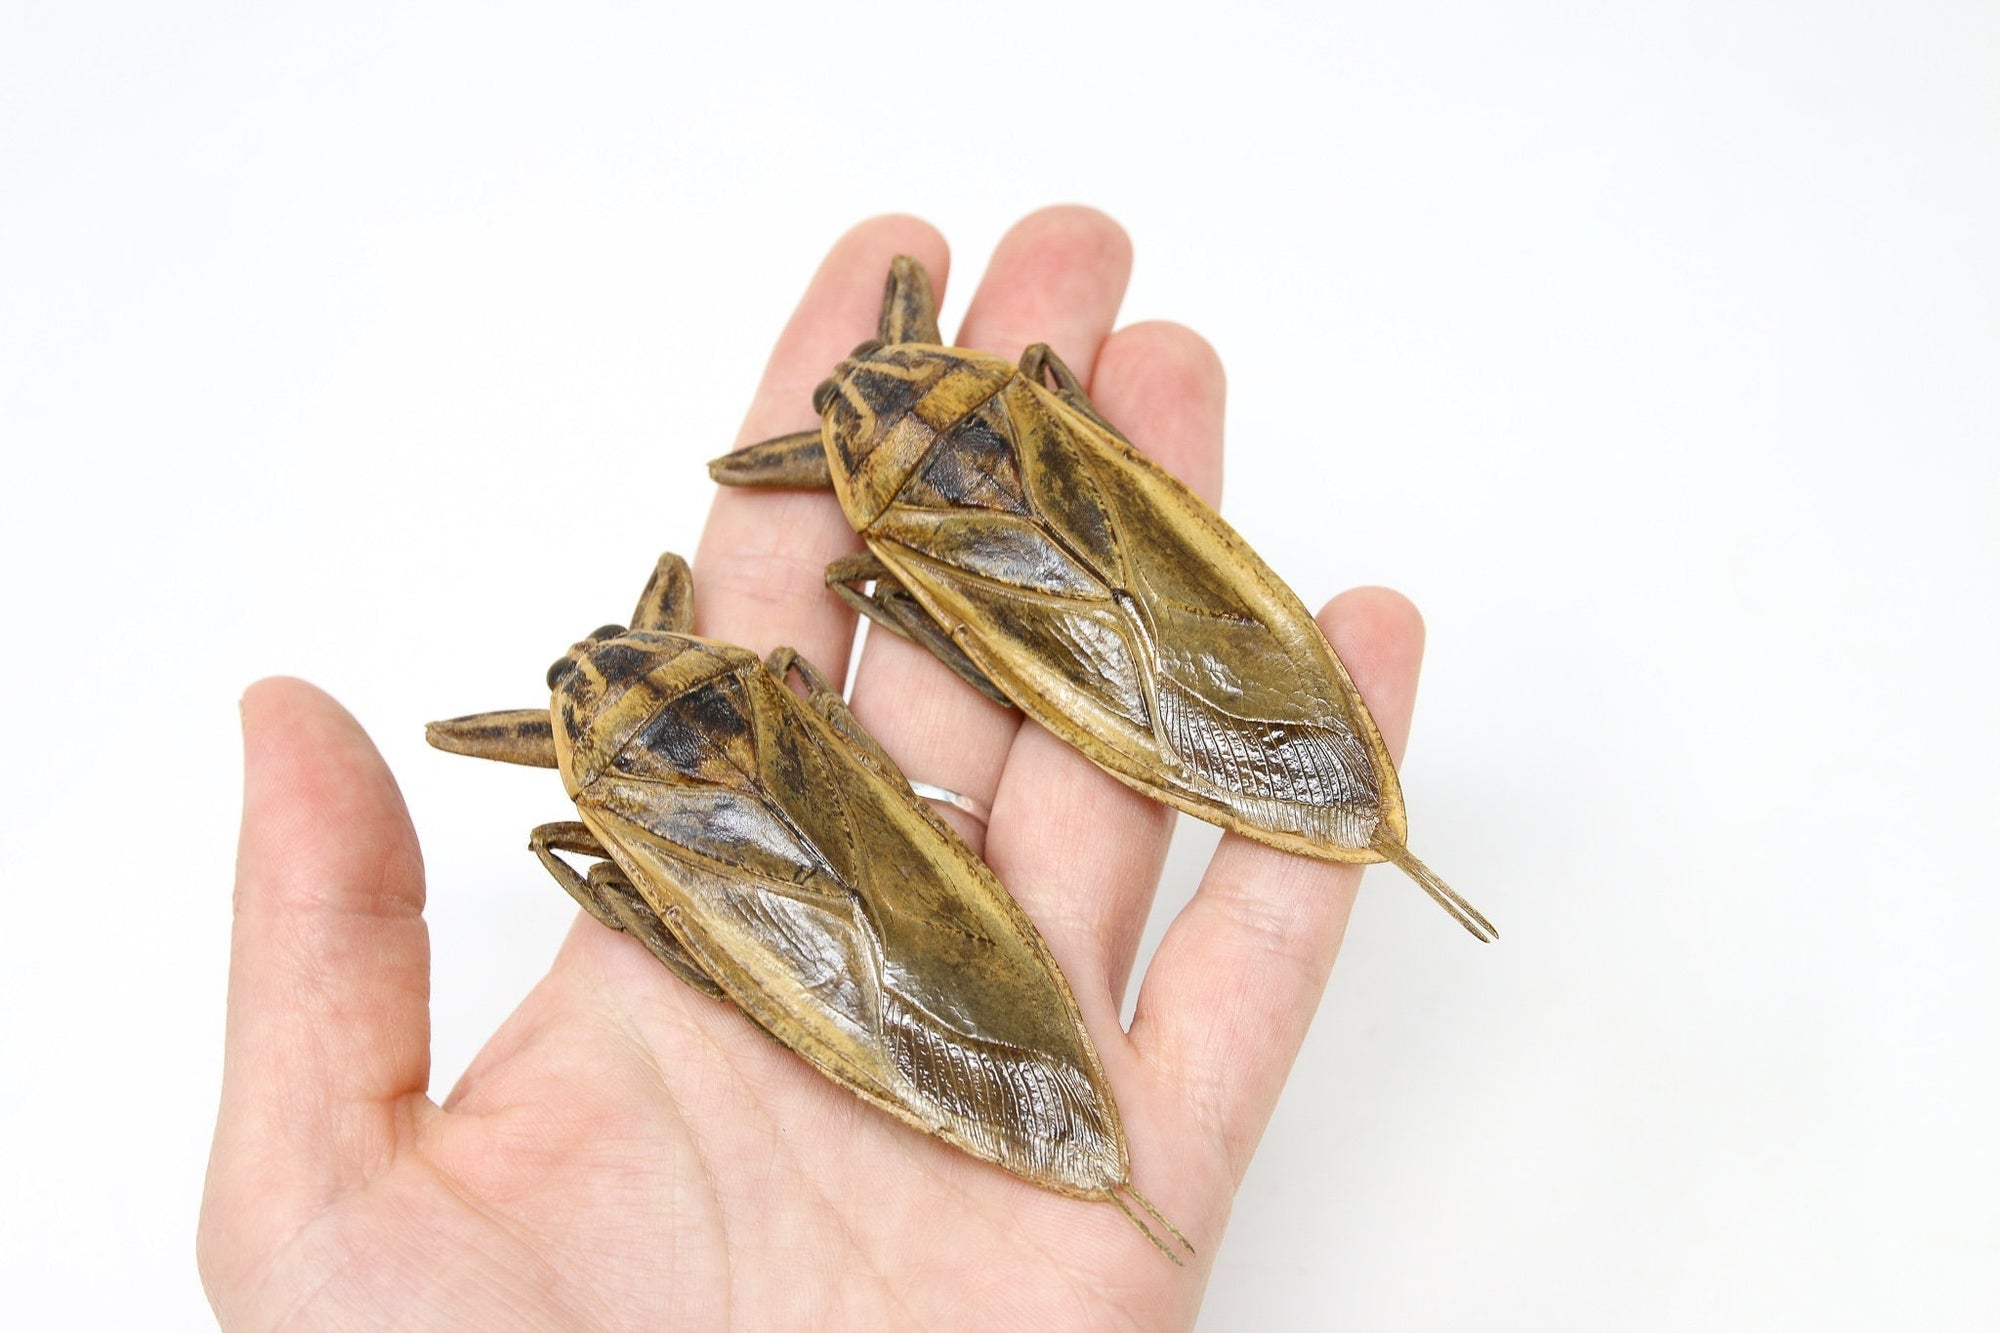 2 x Thai Giant Water Bug 3.5" (Lethocerus grandis) Belostomatidae Specimens A1 Quality Real Insect Entomology